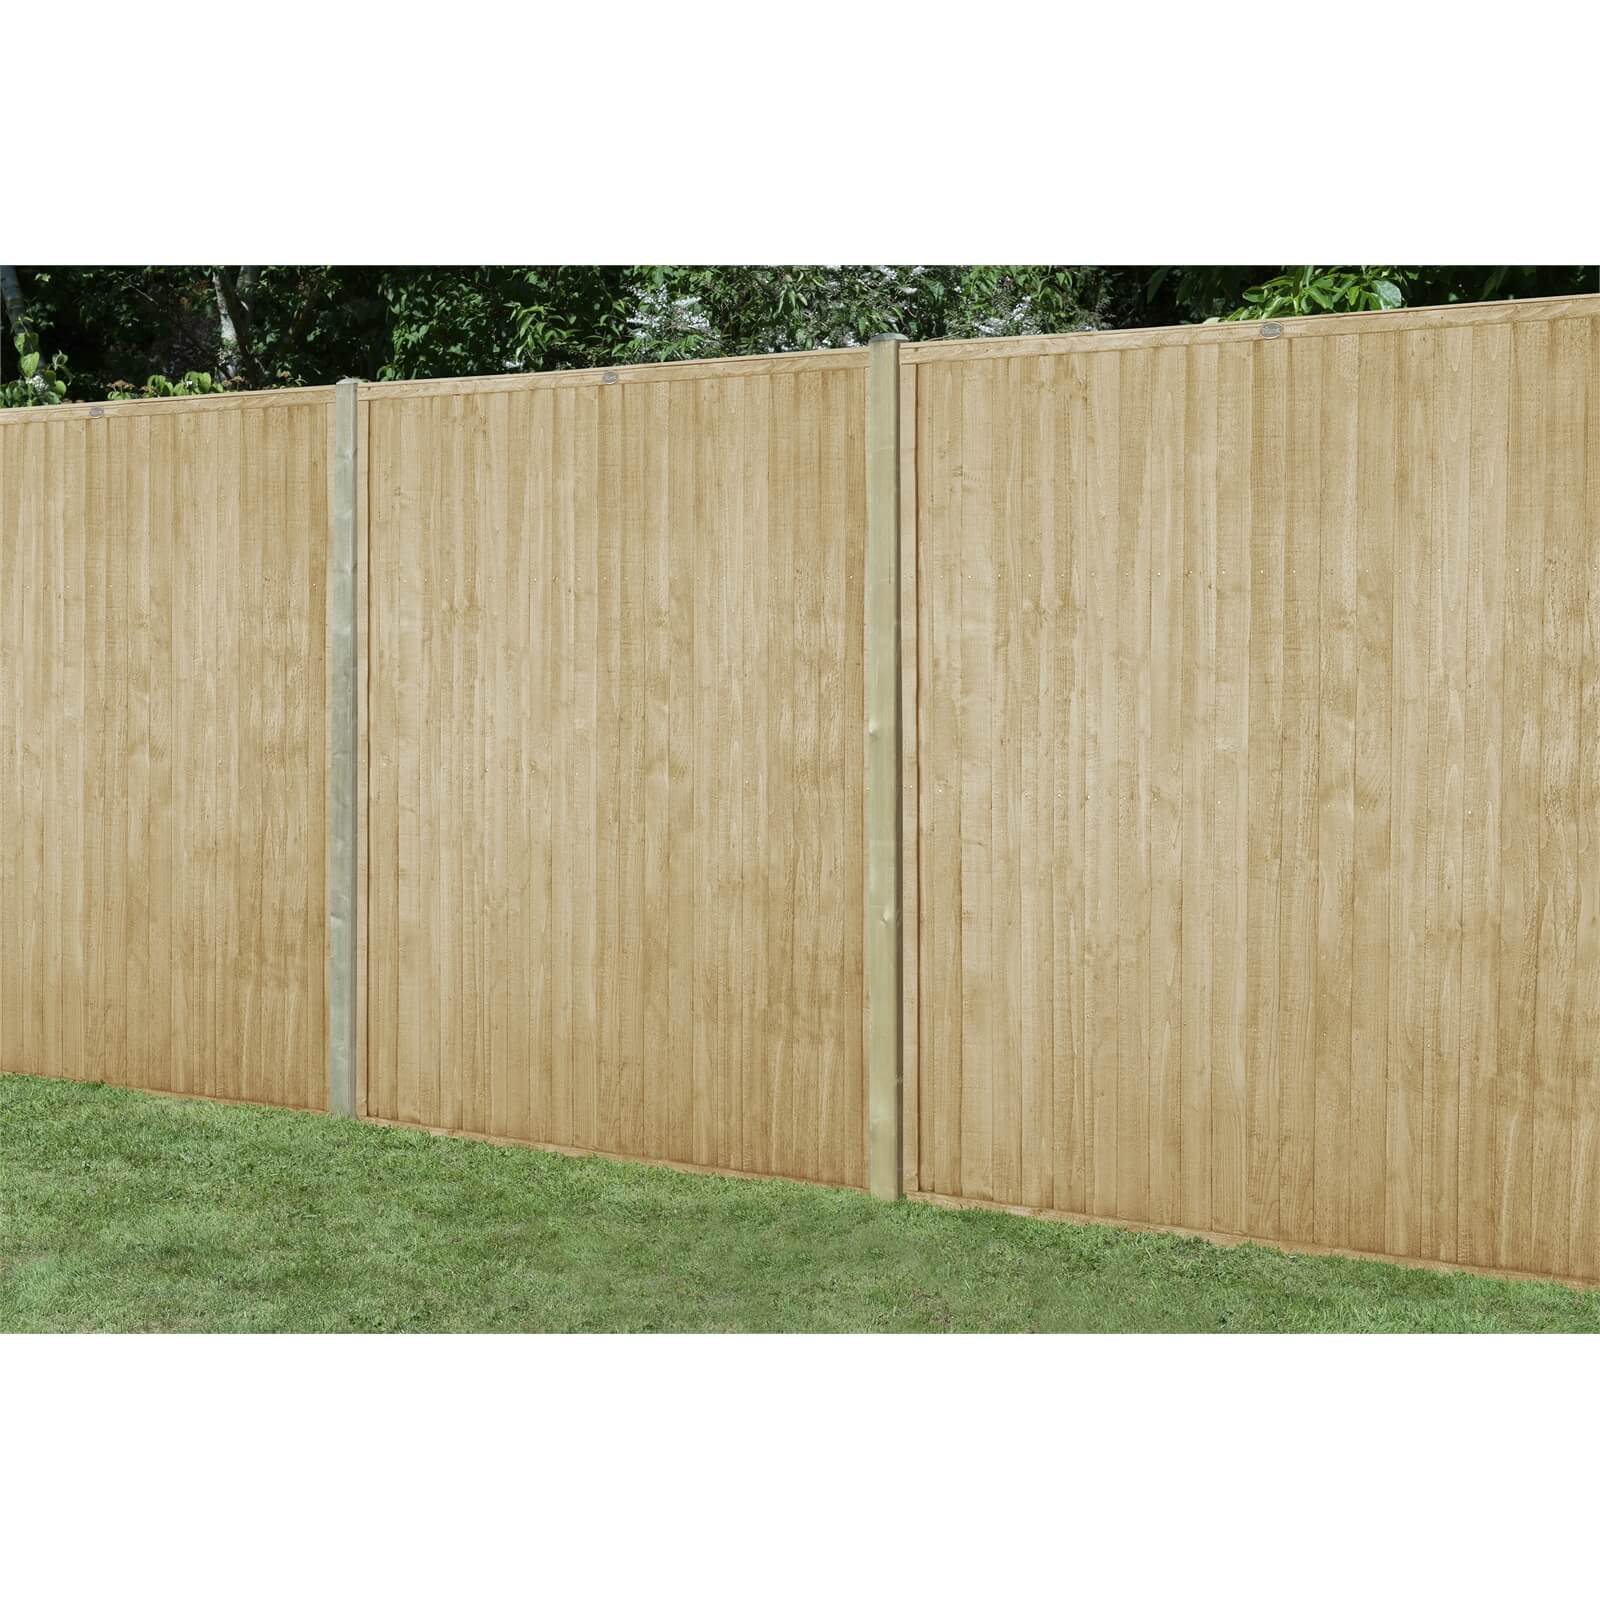 6ft x 6ft (1.83m x 1.83m) Pressure Treated Closeboard Fence Panel - Pack of 4